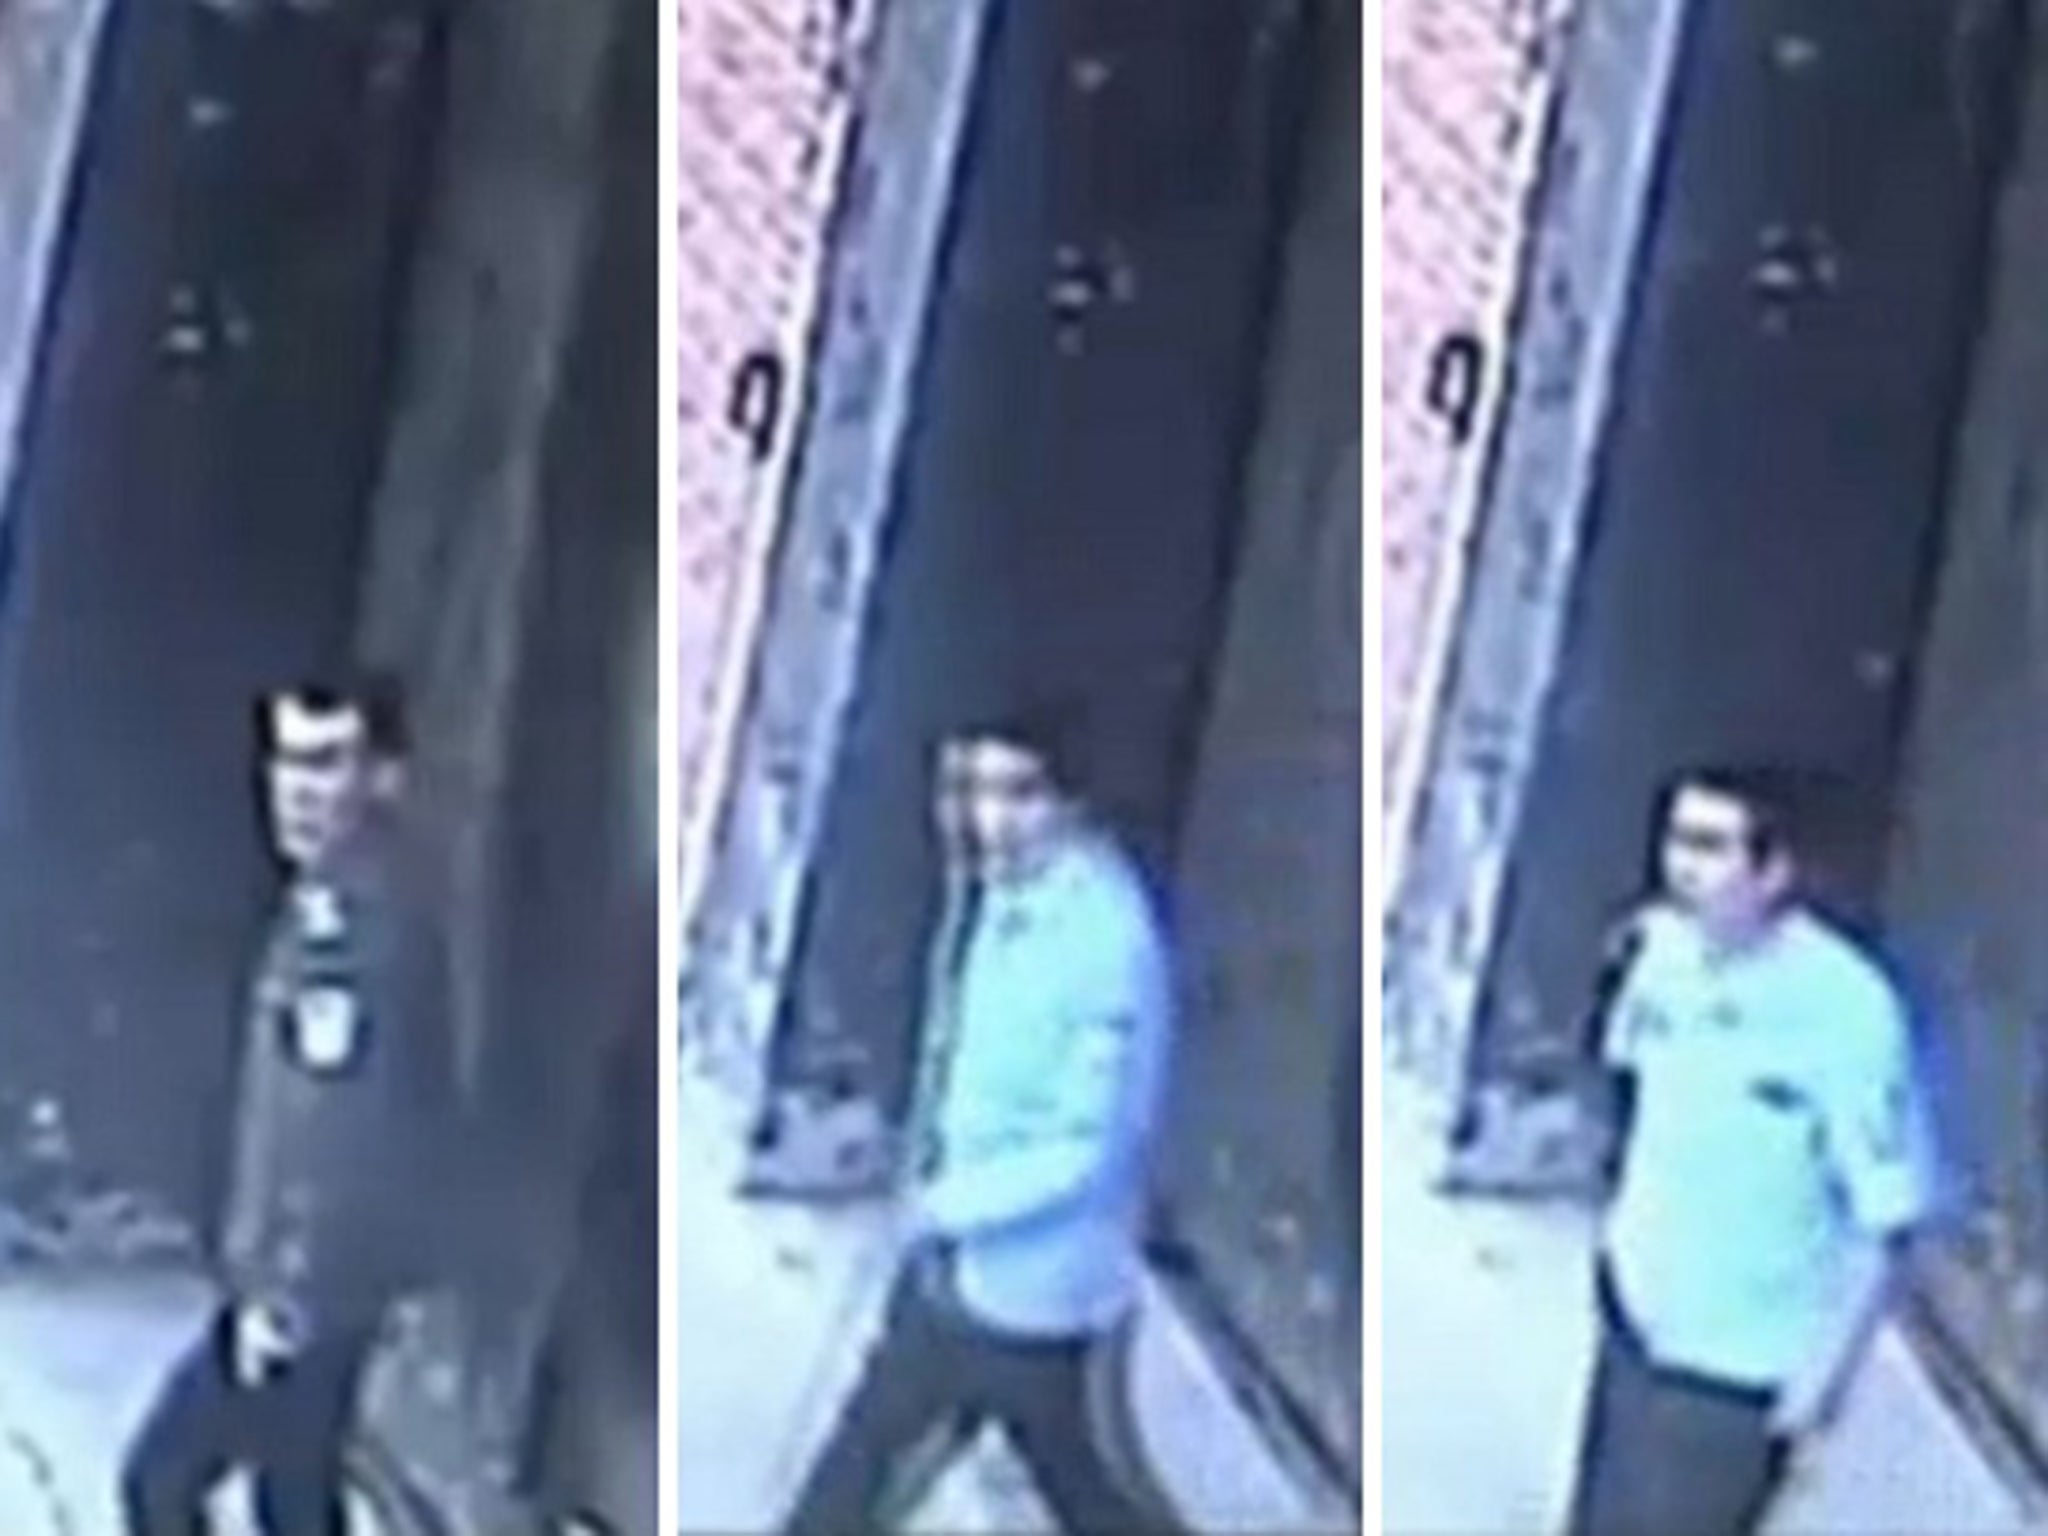 Shocking CCTV footage shows the moment three fugitives broke out of a detention centre in northeast China by killing a guard.